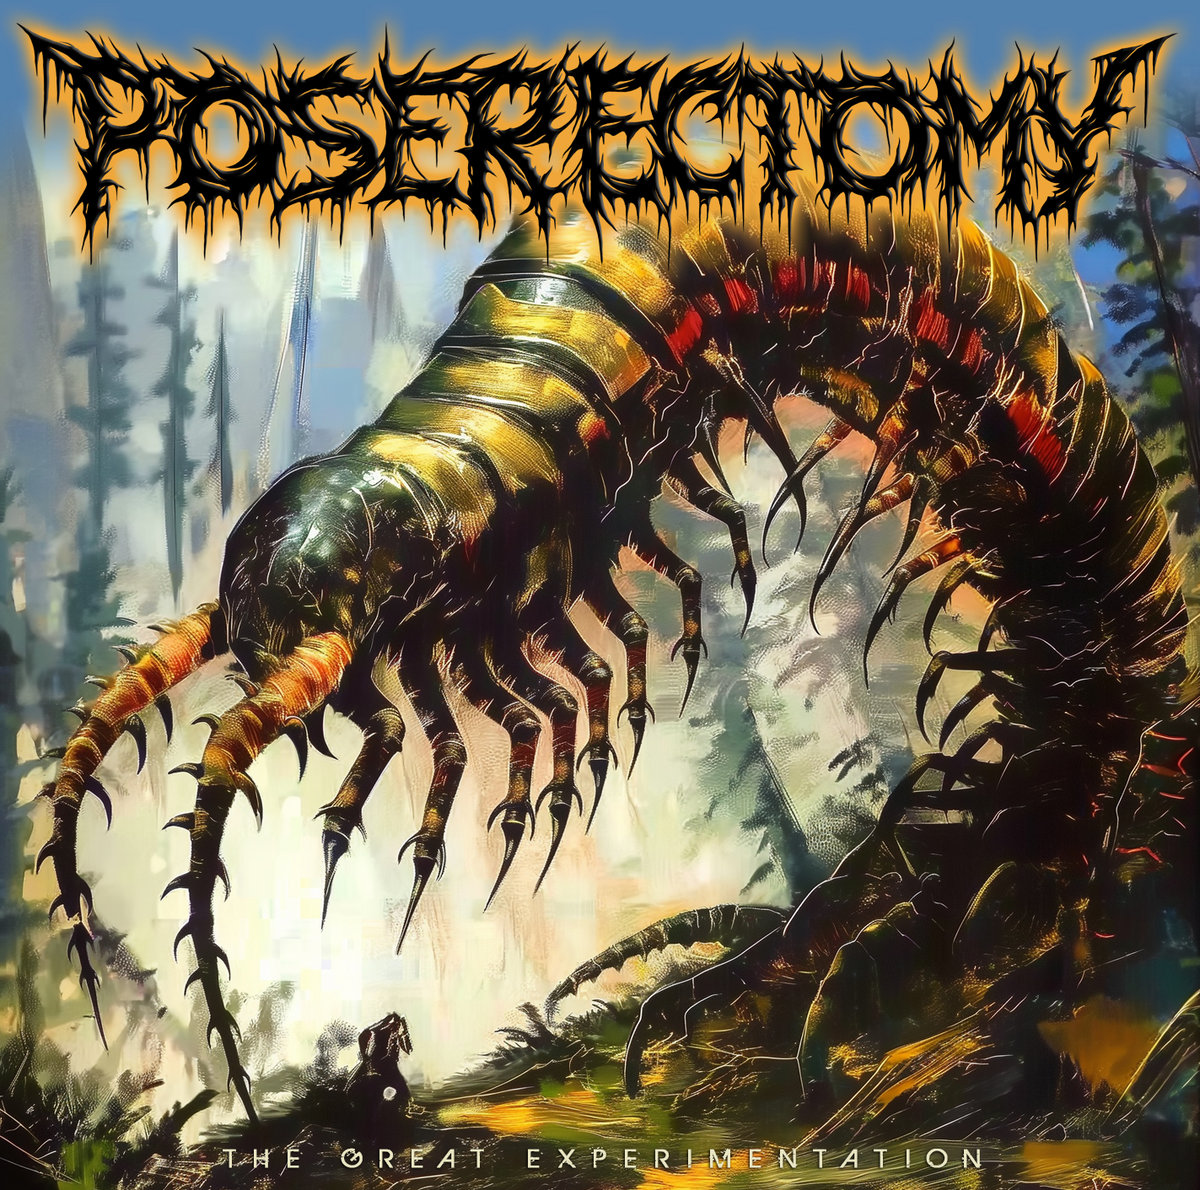 The Great Experimentation Album Review | Poserectomy